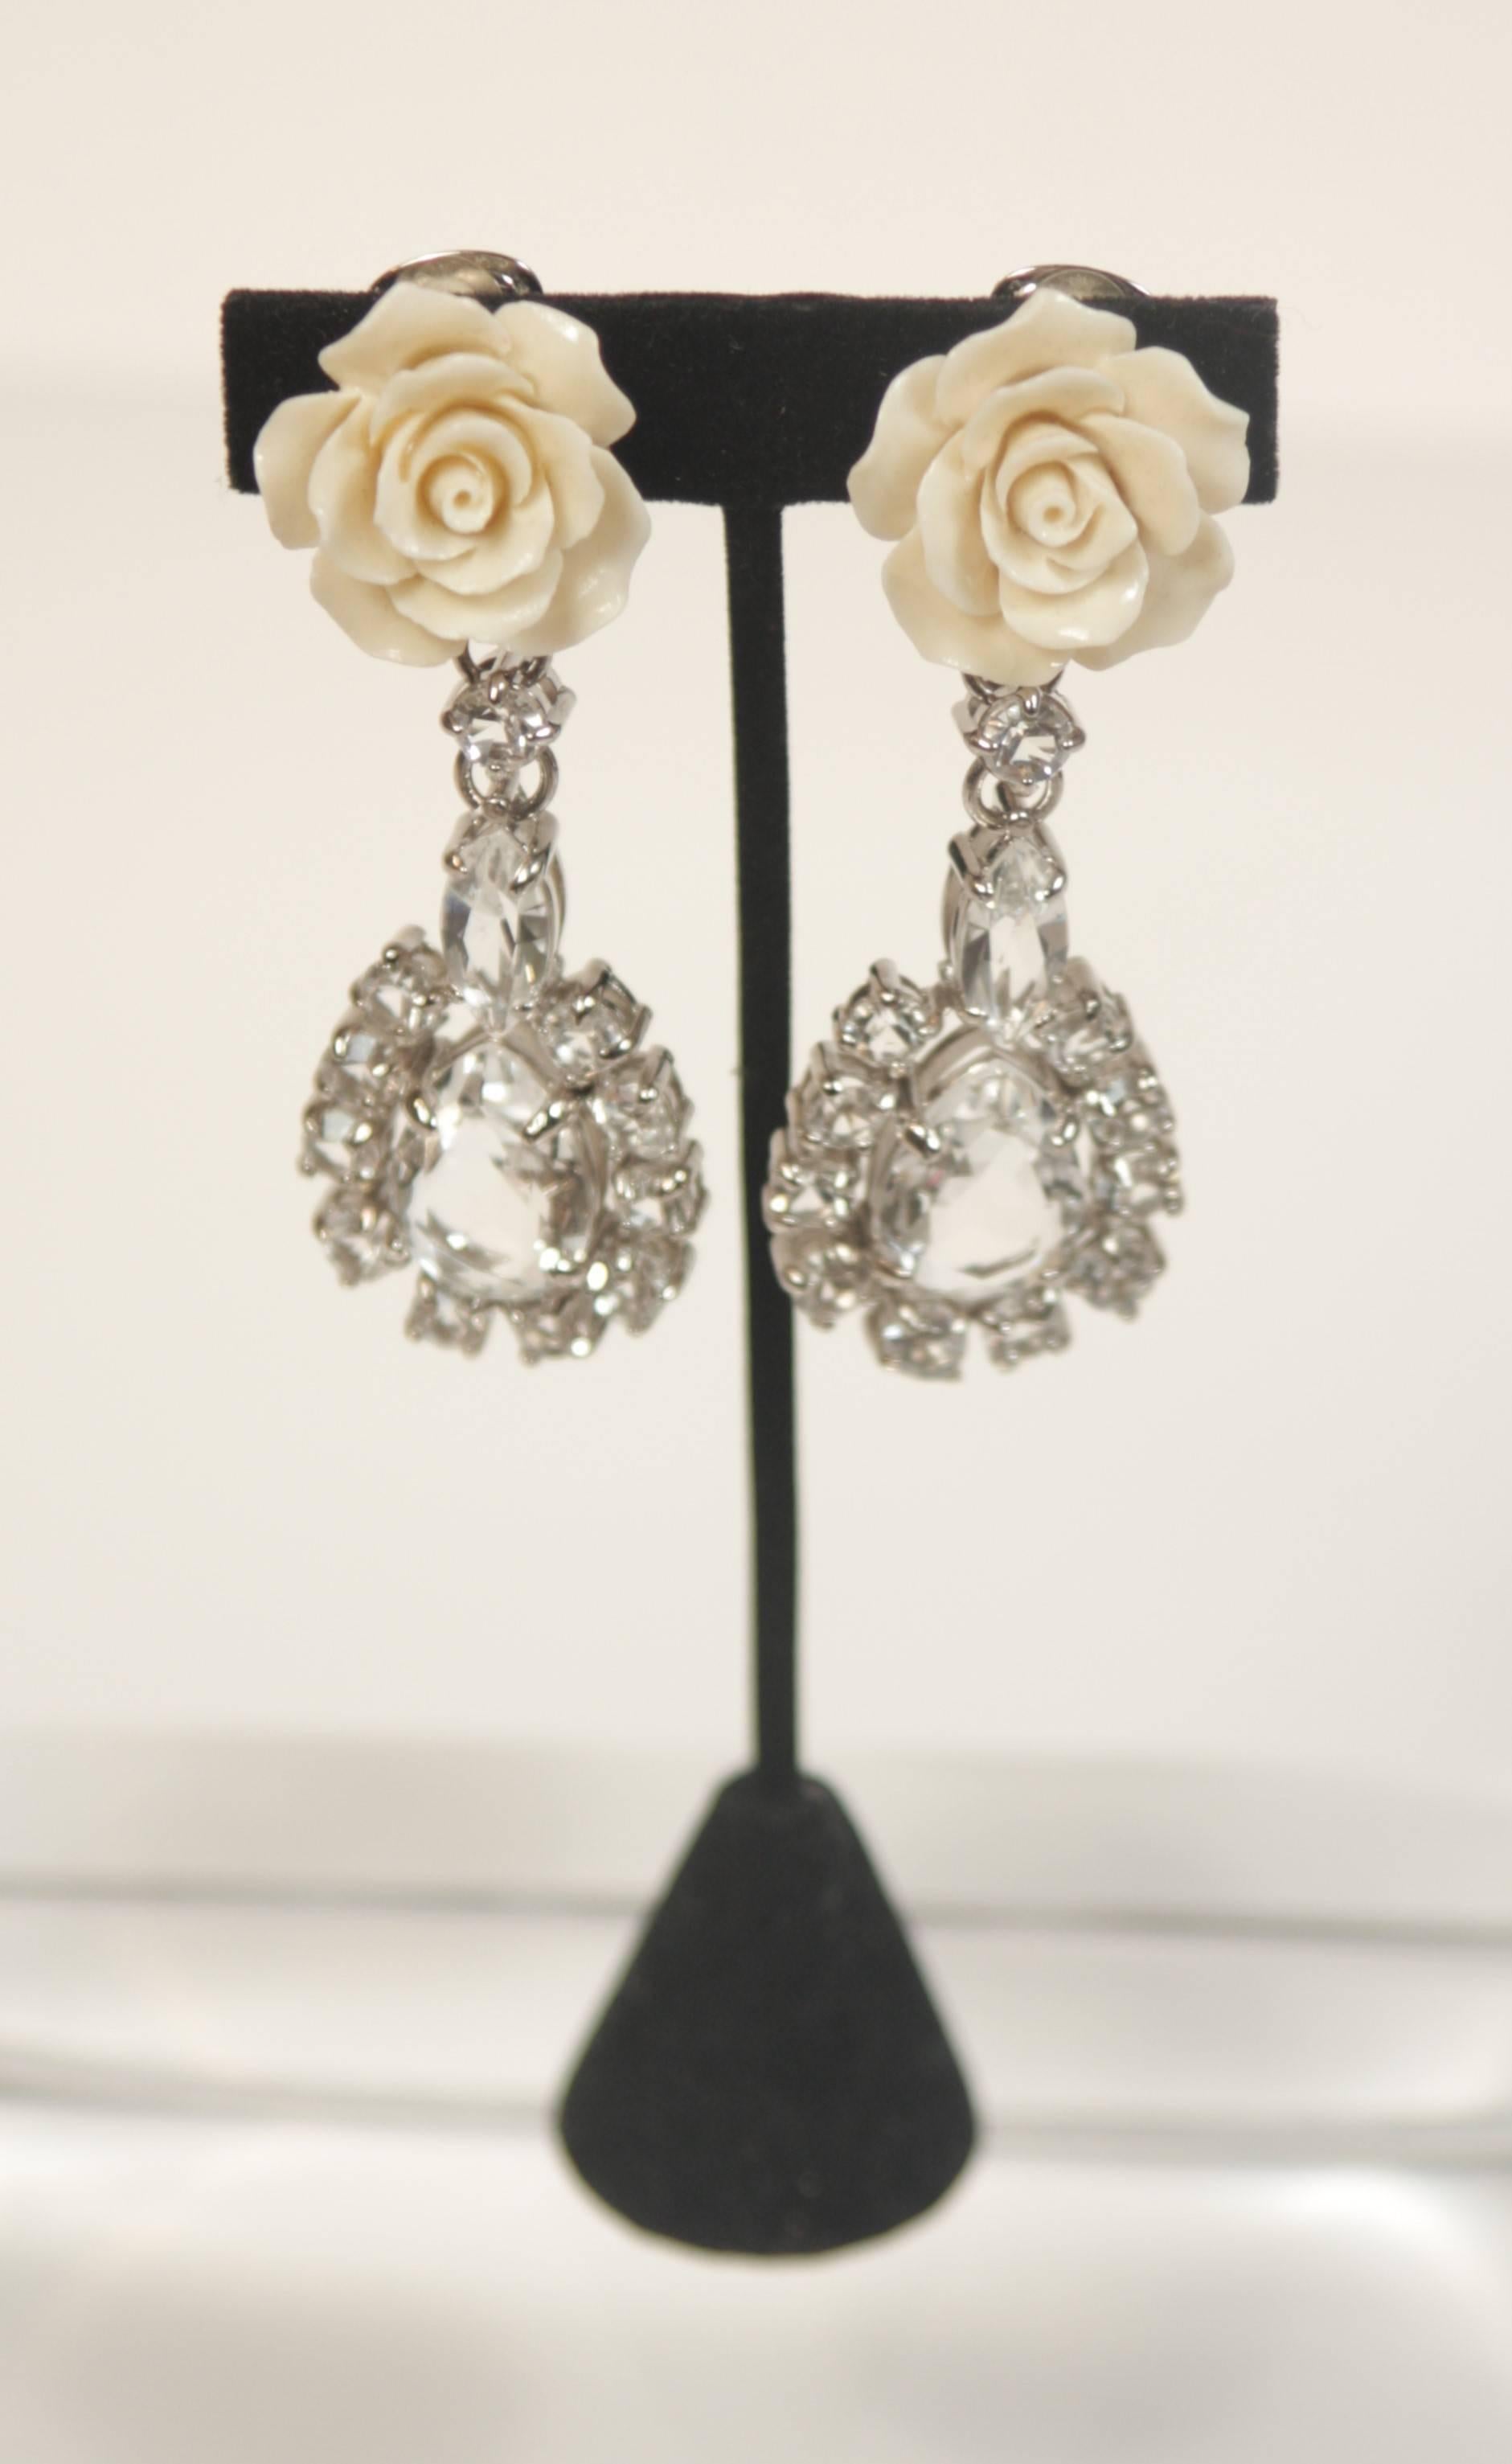 This Prada design is available for viewing at our Beverly Hills Boutique. We offer a large selection of evening gowns and luxury garments. 

 These earrings are composed of a silver tone metal with large set rhinestones and a cream hue rose